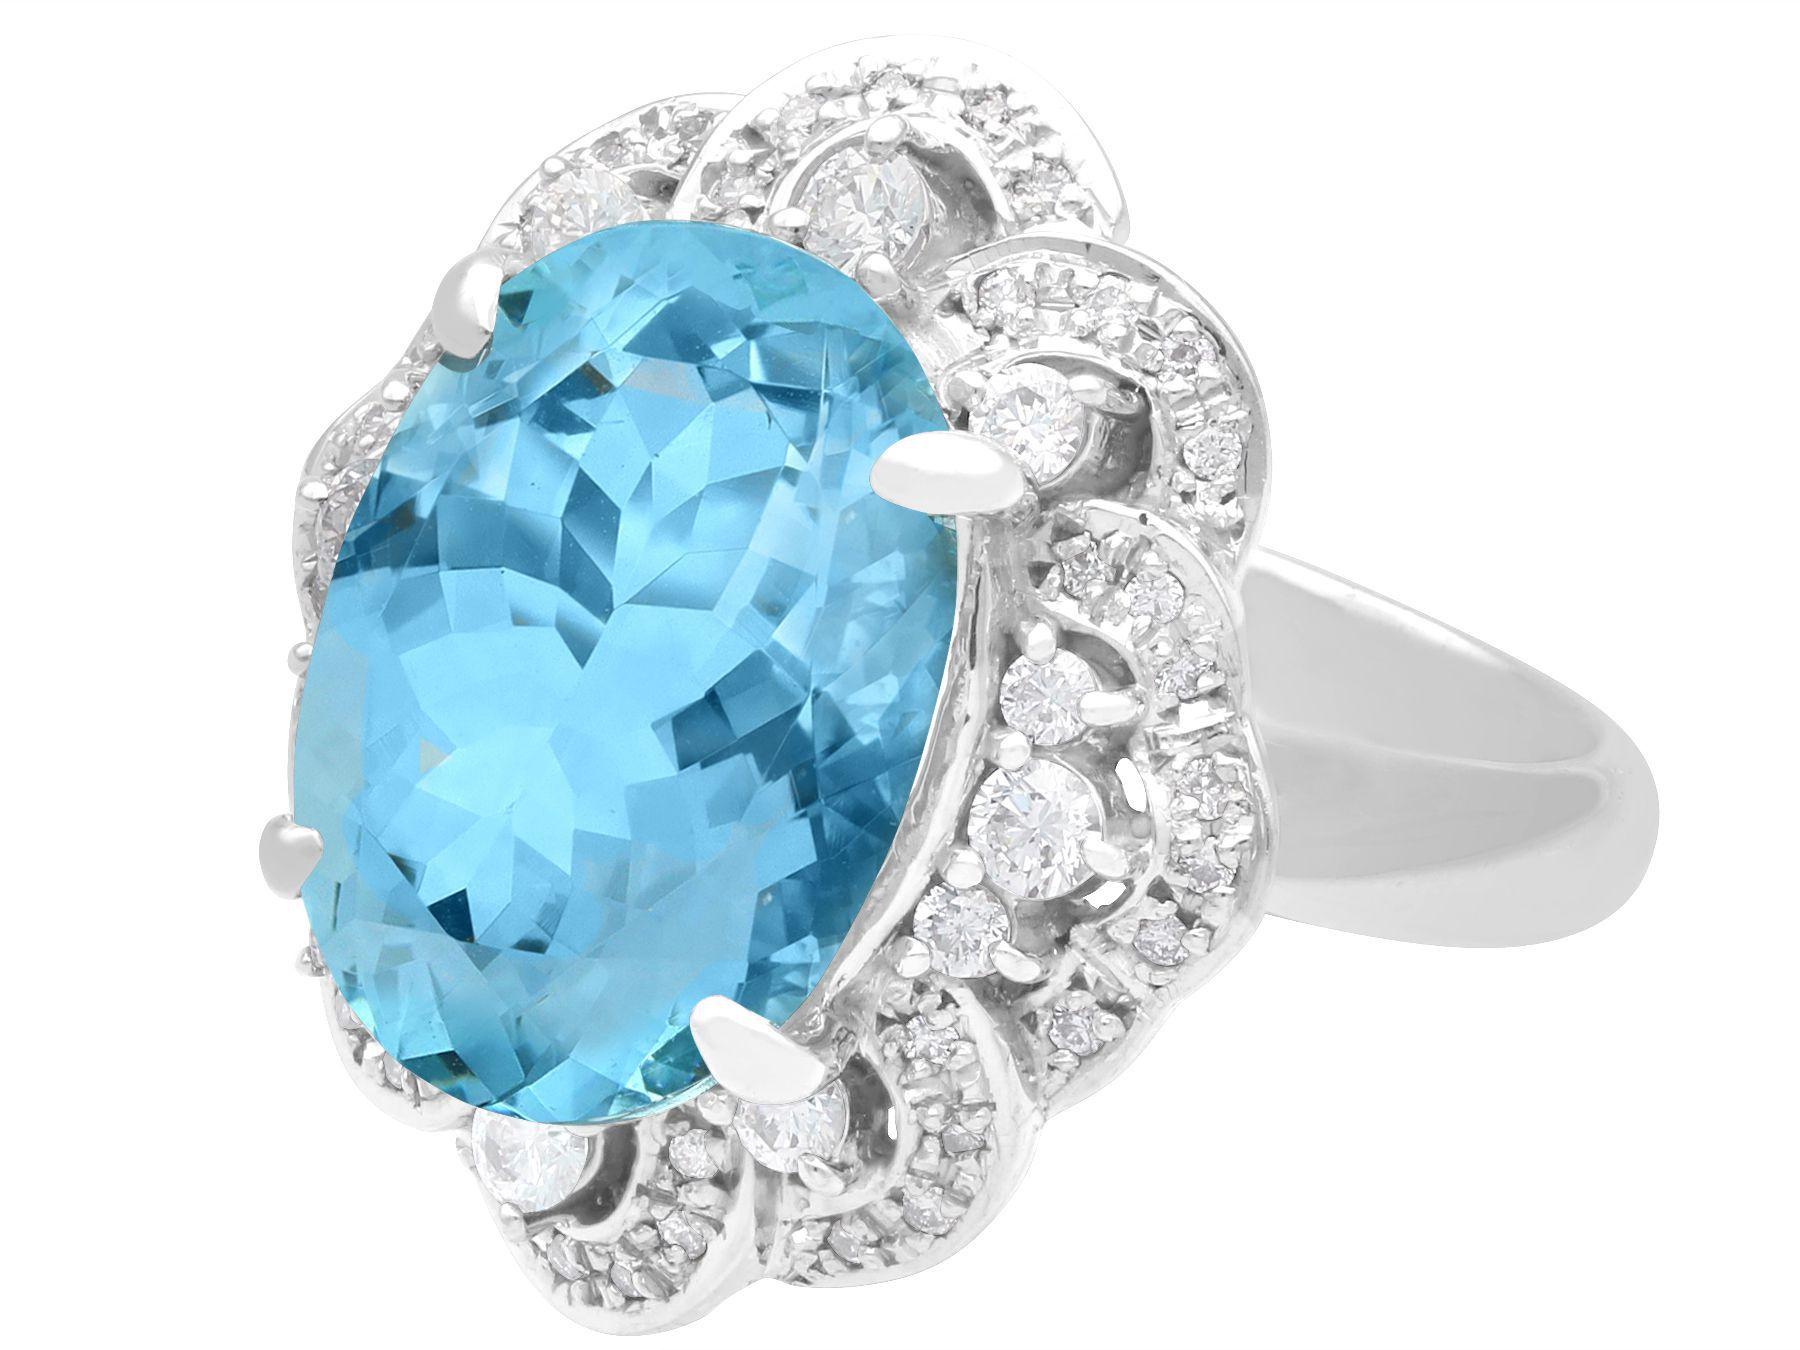 A stunning, fine and impressive 9.26 carat aquamarine and 0.70 carat diamond, 18 karat white gold dress ring; part of our diverse gemstone jewelry and estate jewelry collections.

This stunning, fine and impressive aquamarine ring has been crafted